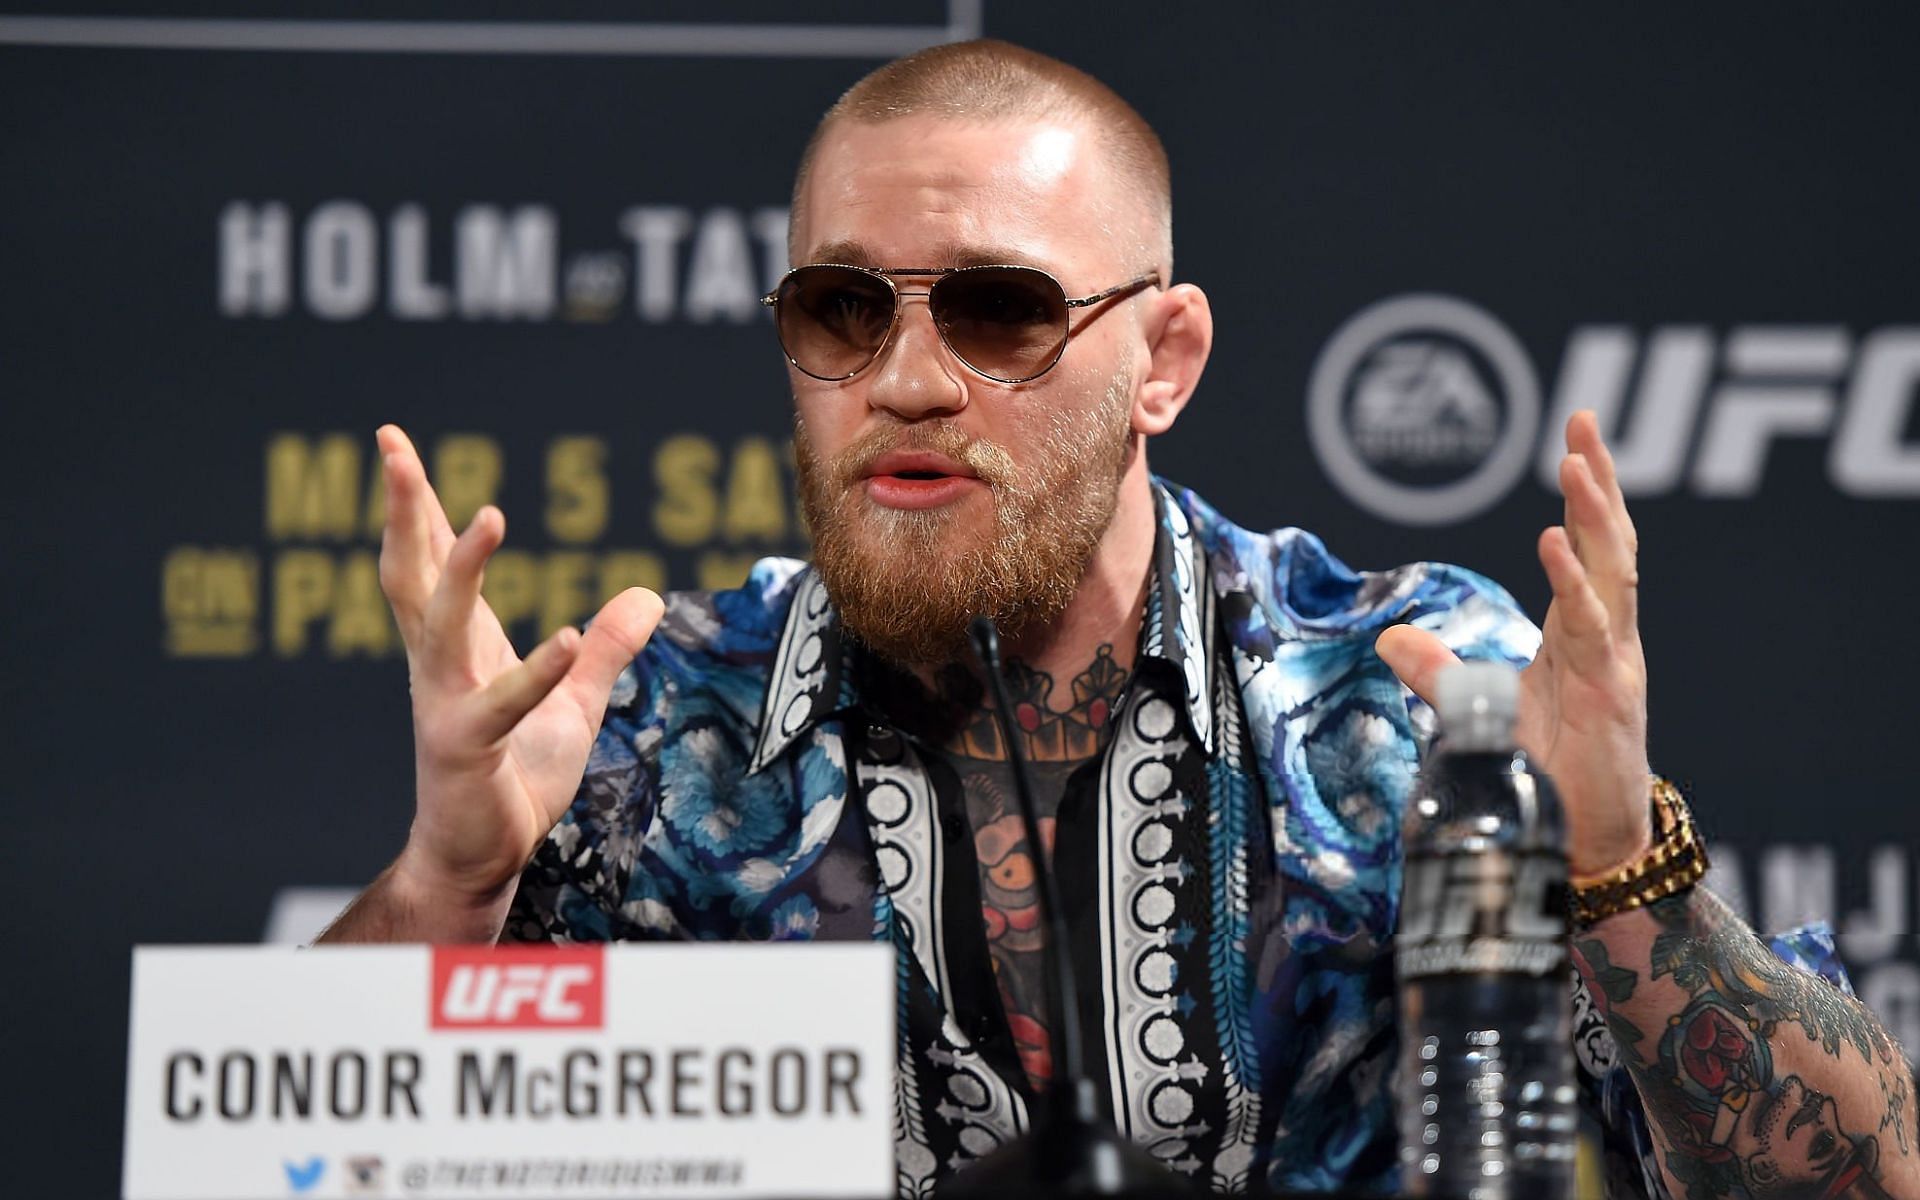 Conor McGregor at UFC 197 press conference [Image Courtesy: @GettyImages]